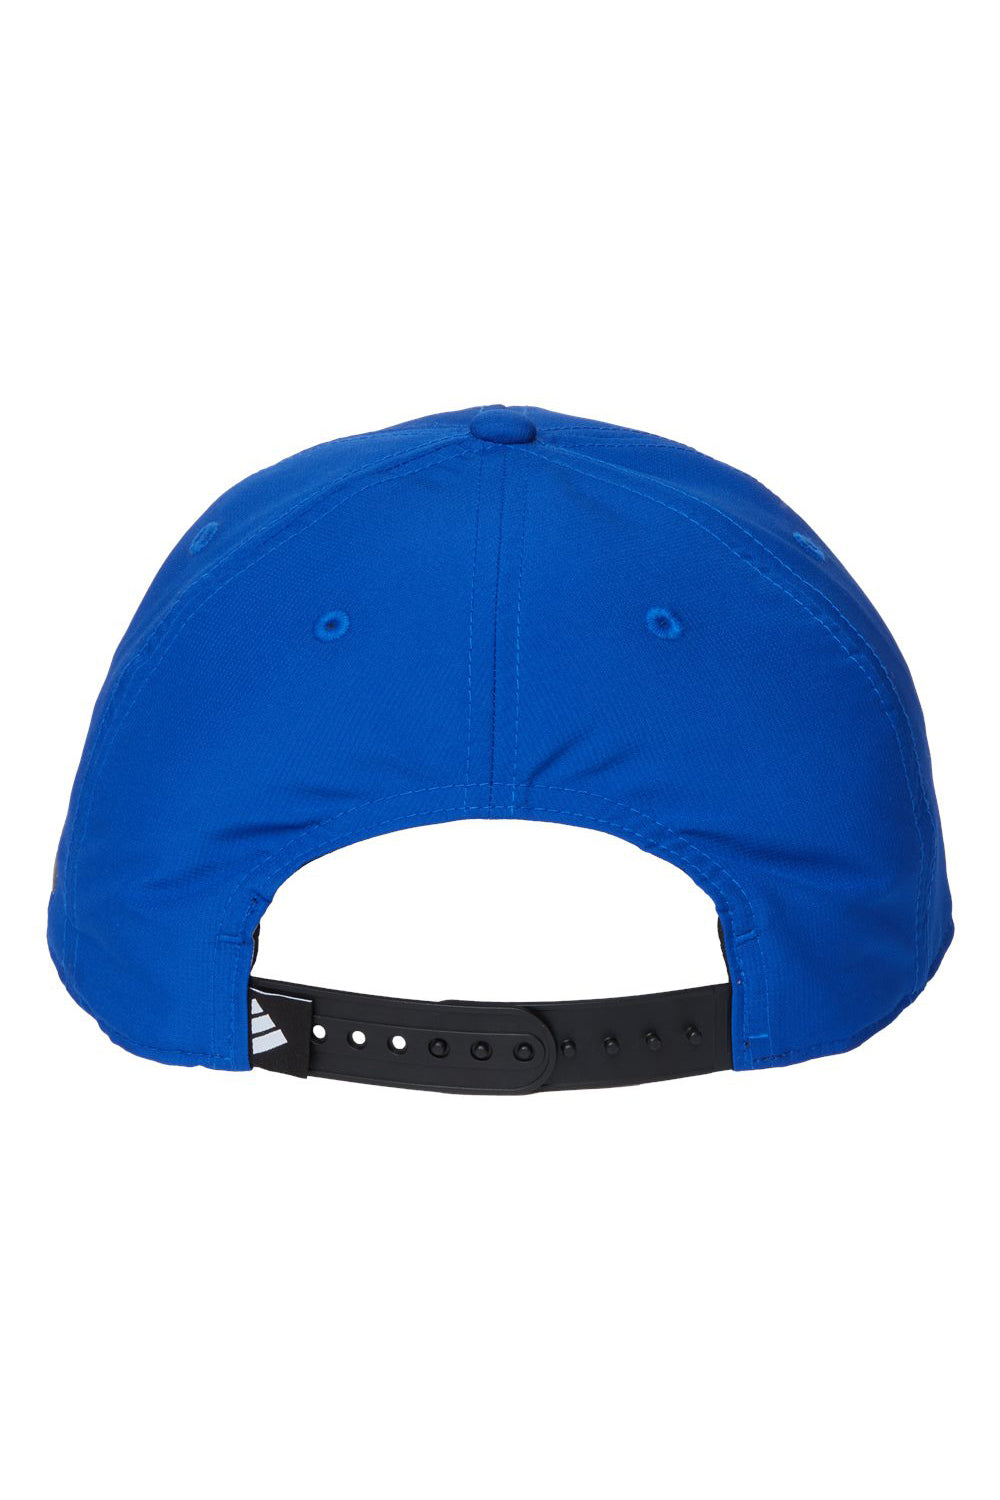 Adidas A600S Mens Sustainable Performance Max Moisture Wicking Snapback Hat Collegiate Royal Blue Flat Back